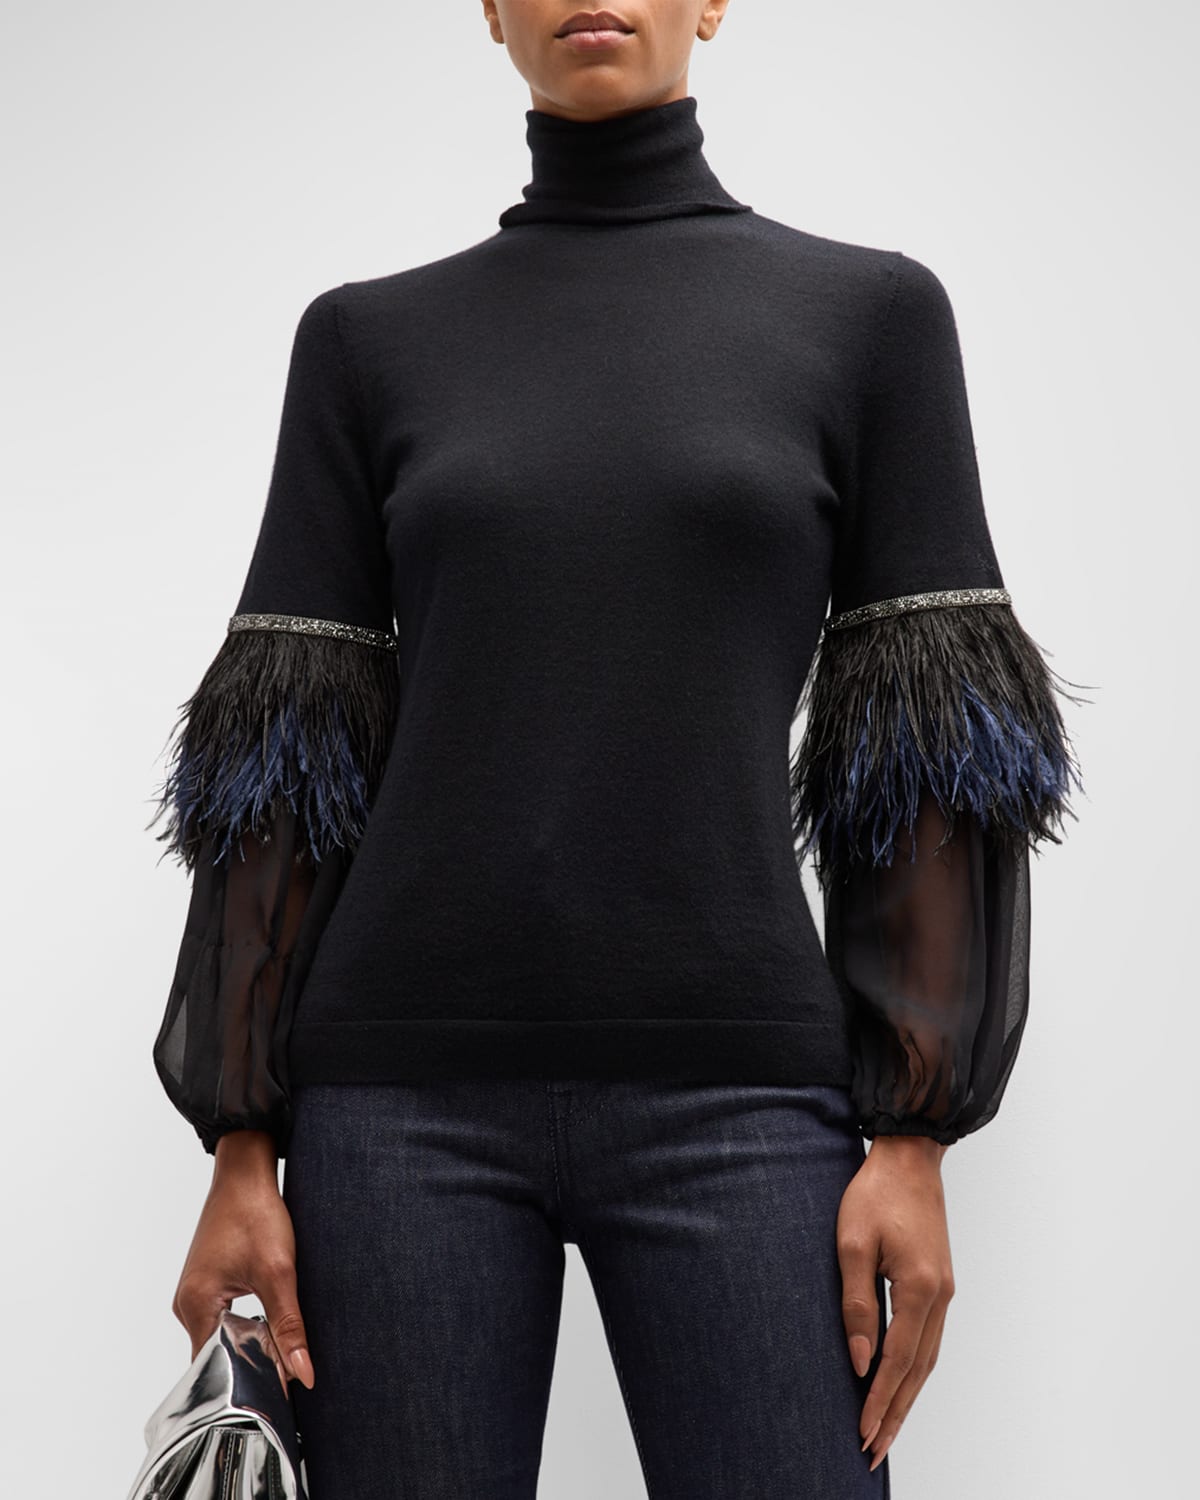 Neiman Marcus Superfine Cashmere Sweater With Chiffon Feather Sleeves In Black